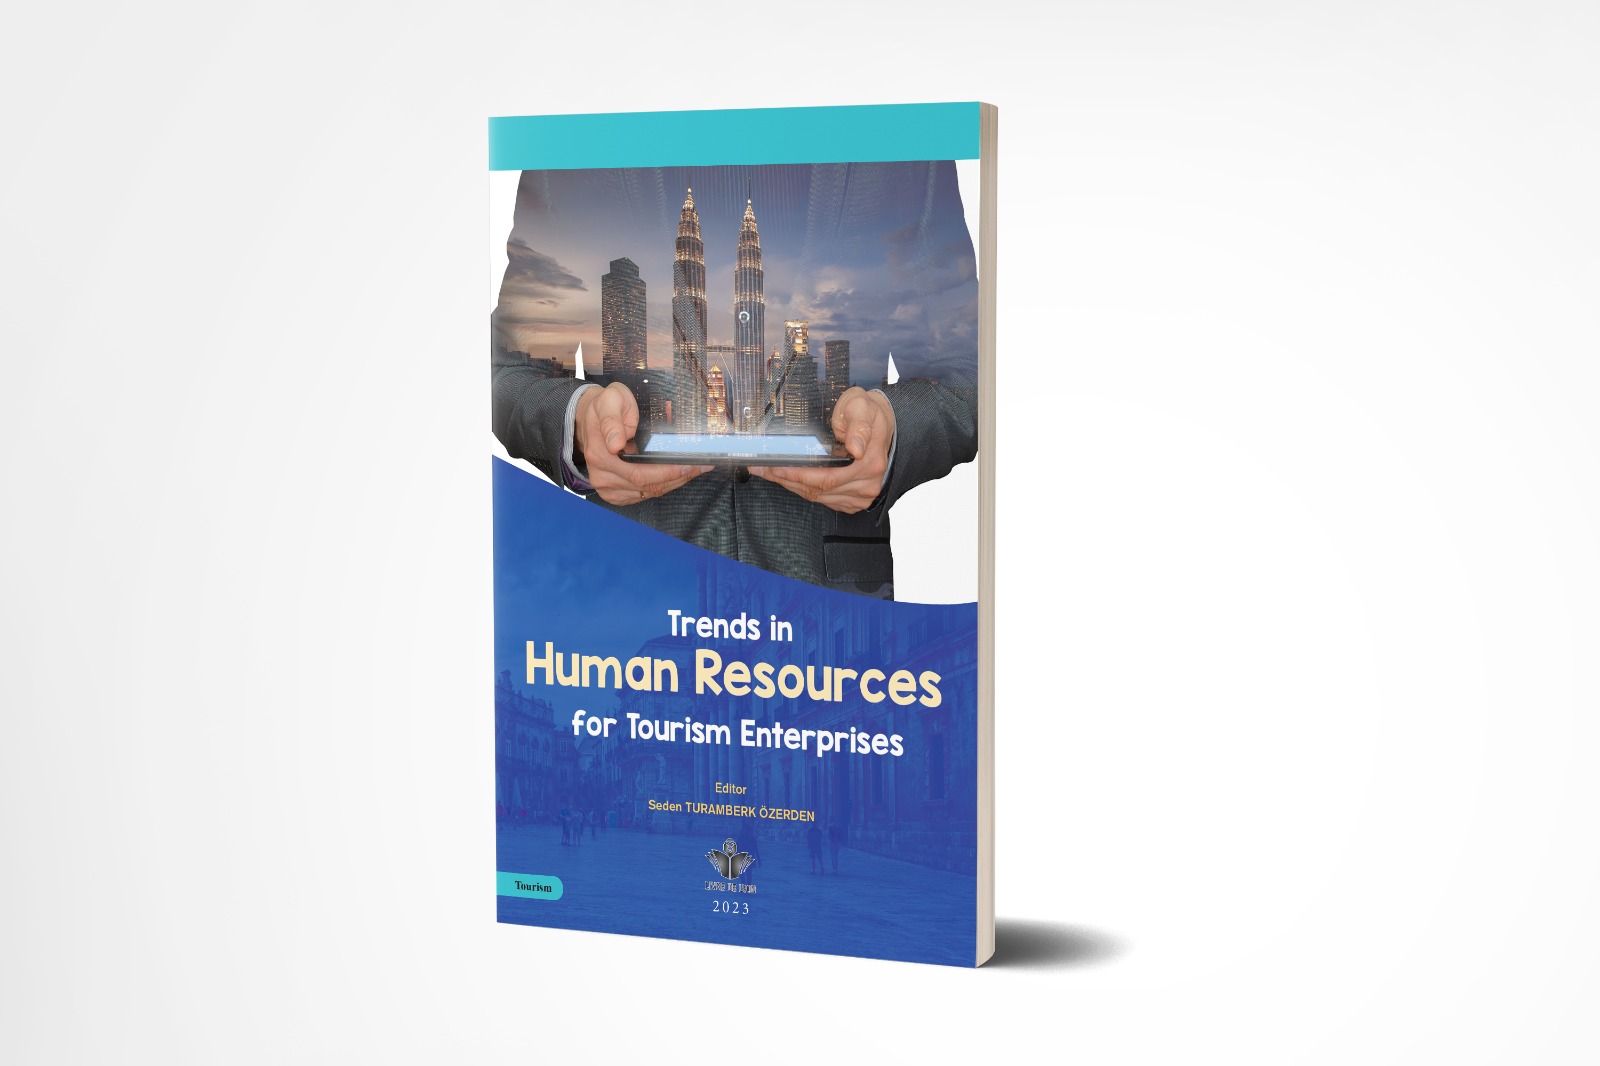 Trends in Human Resources for Tourism Enterprises